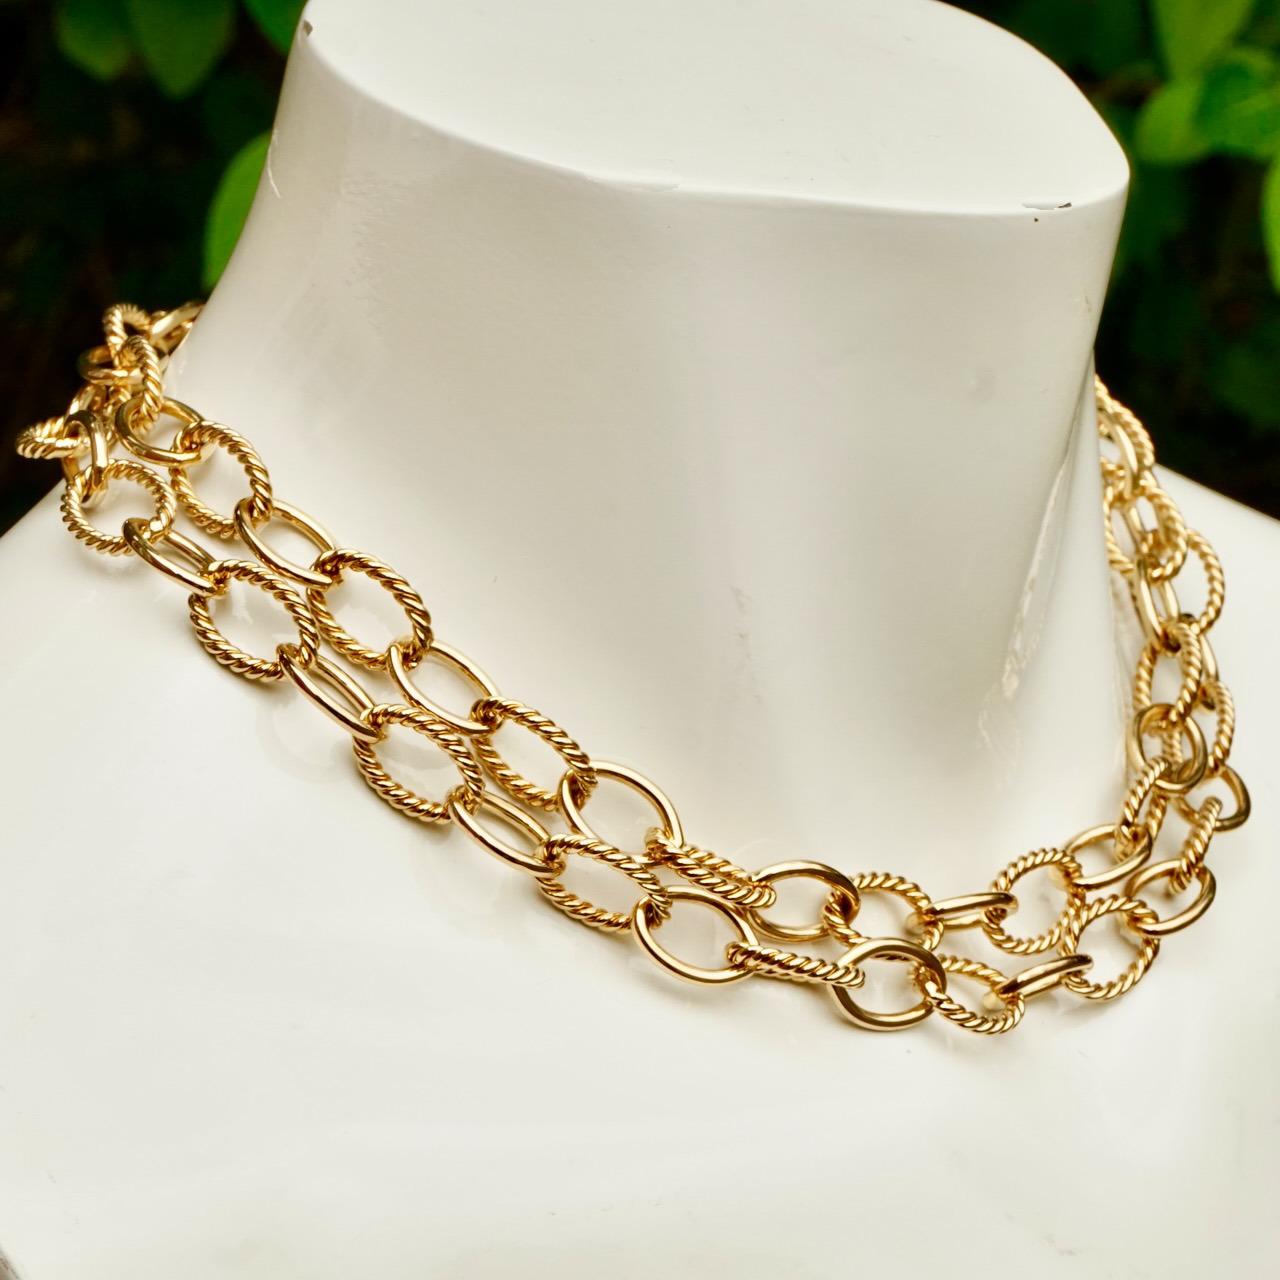 Women's or Men's Monet Gold Plated Oval Link Chain Necklace circa 1980s 